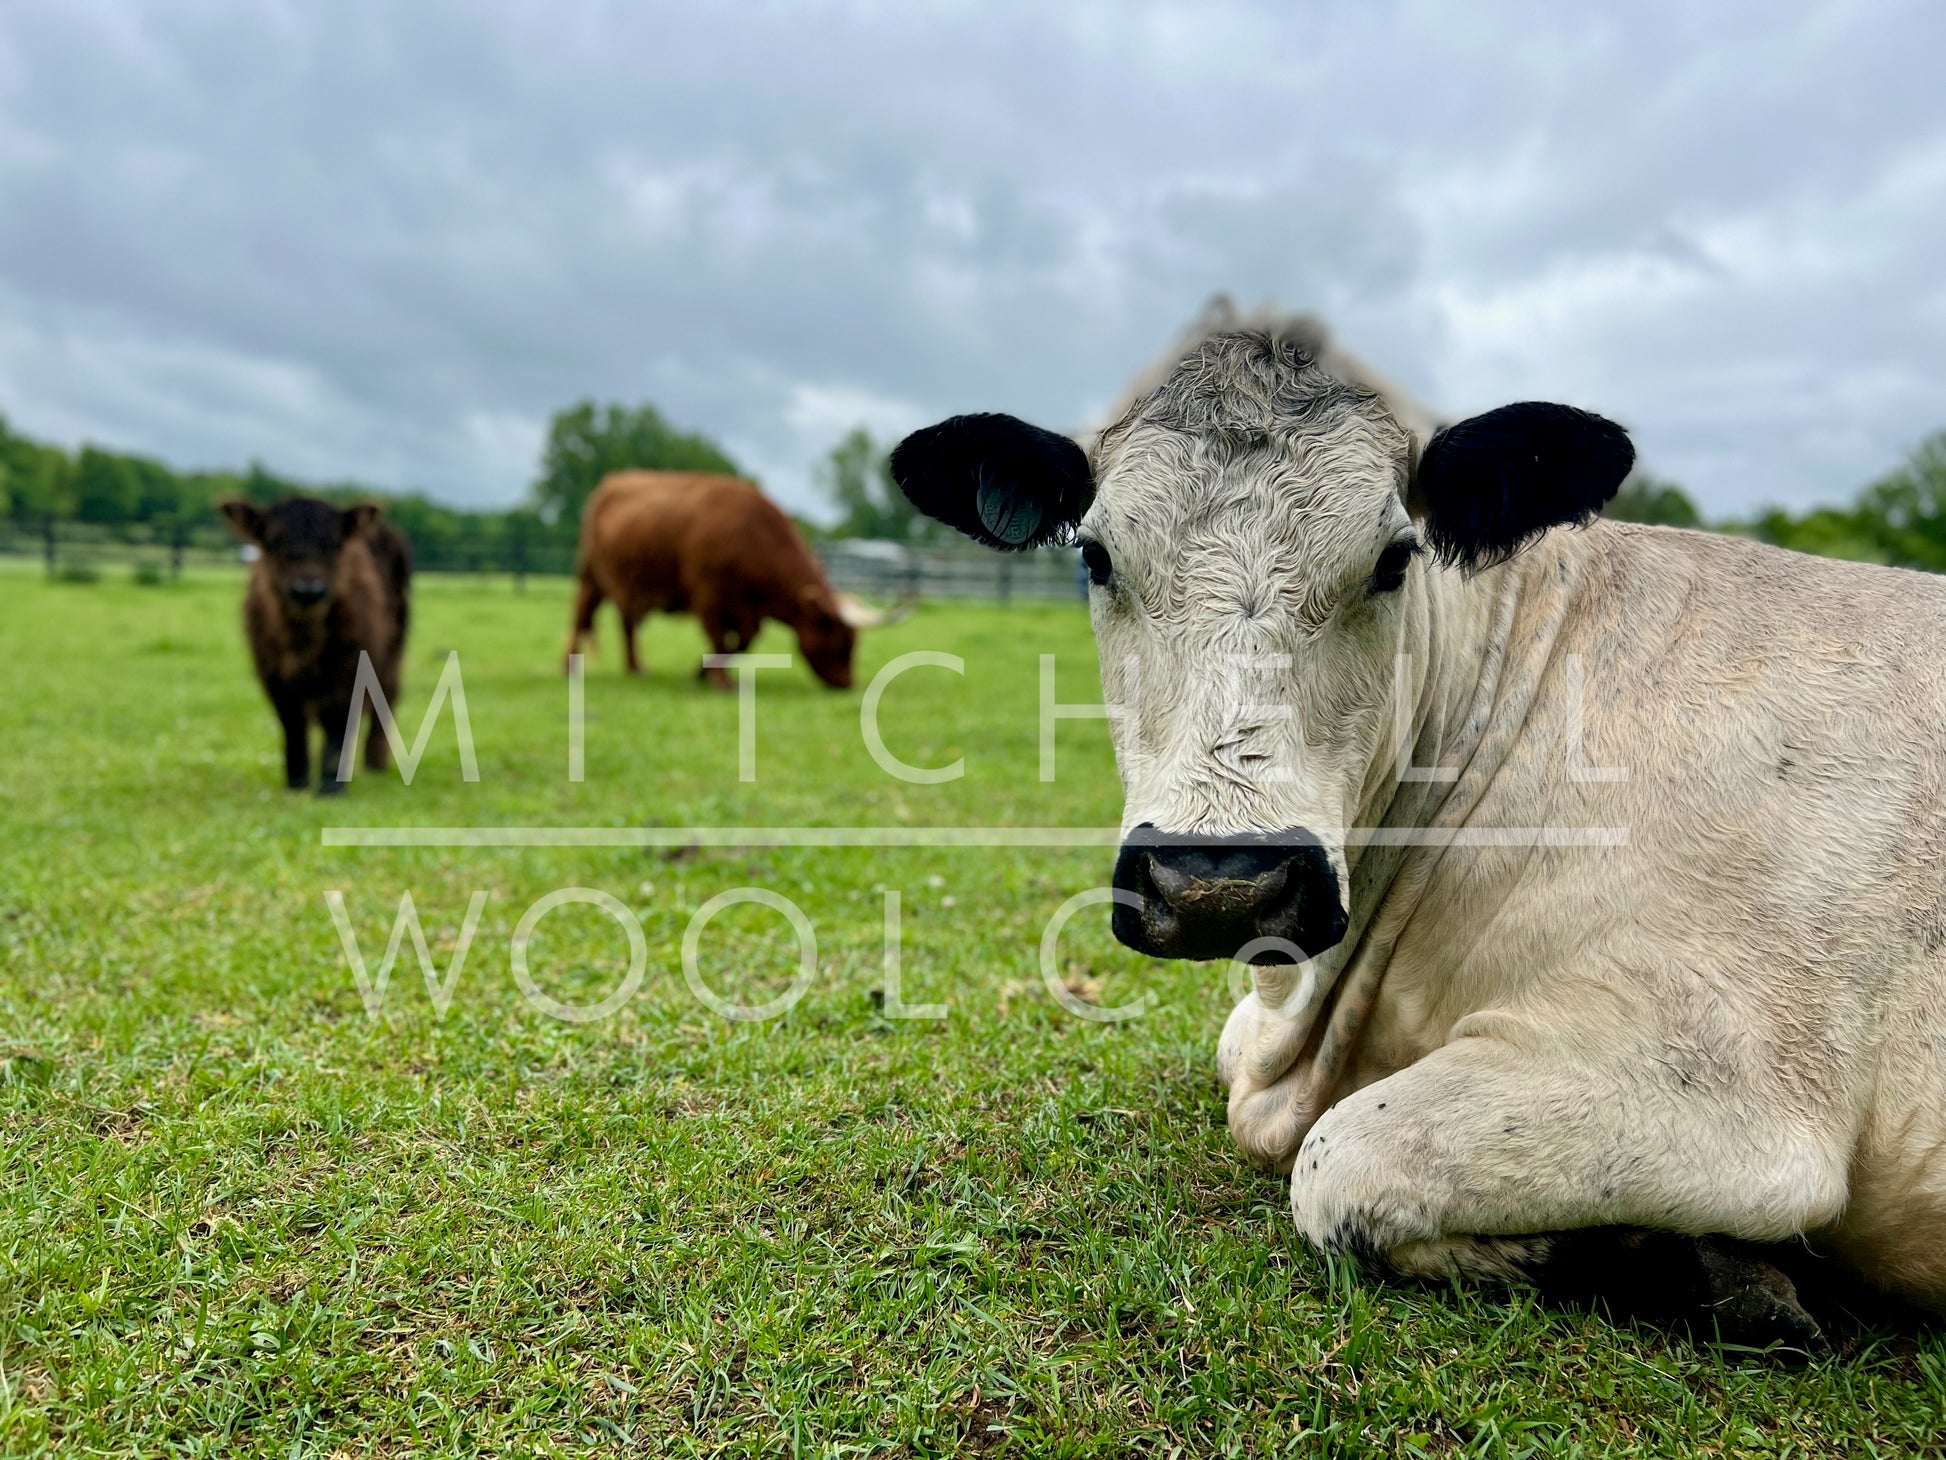 Dorothy, a British White Cow, lounges cozily on green pasture with Shrek & Fiona (two highland Cattle)  in the soft focus background.